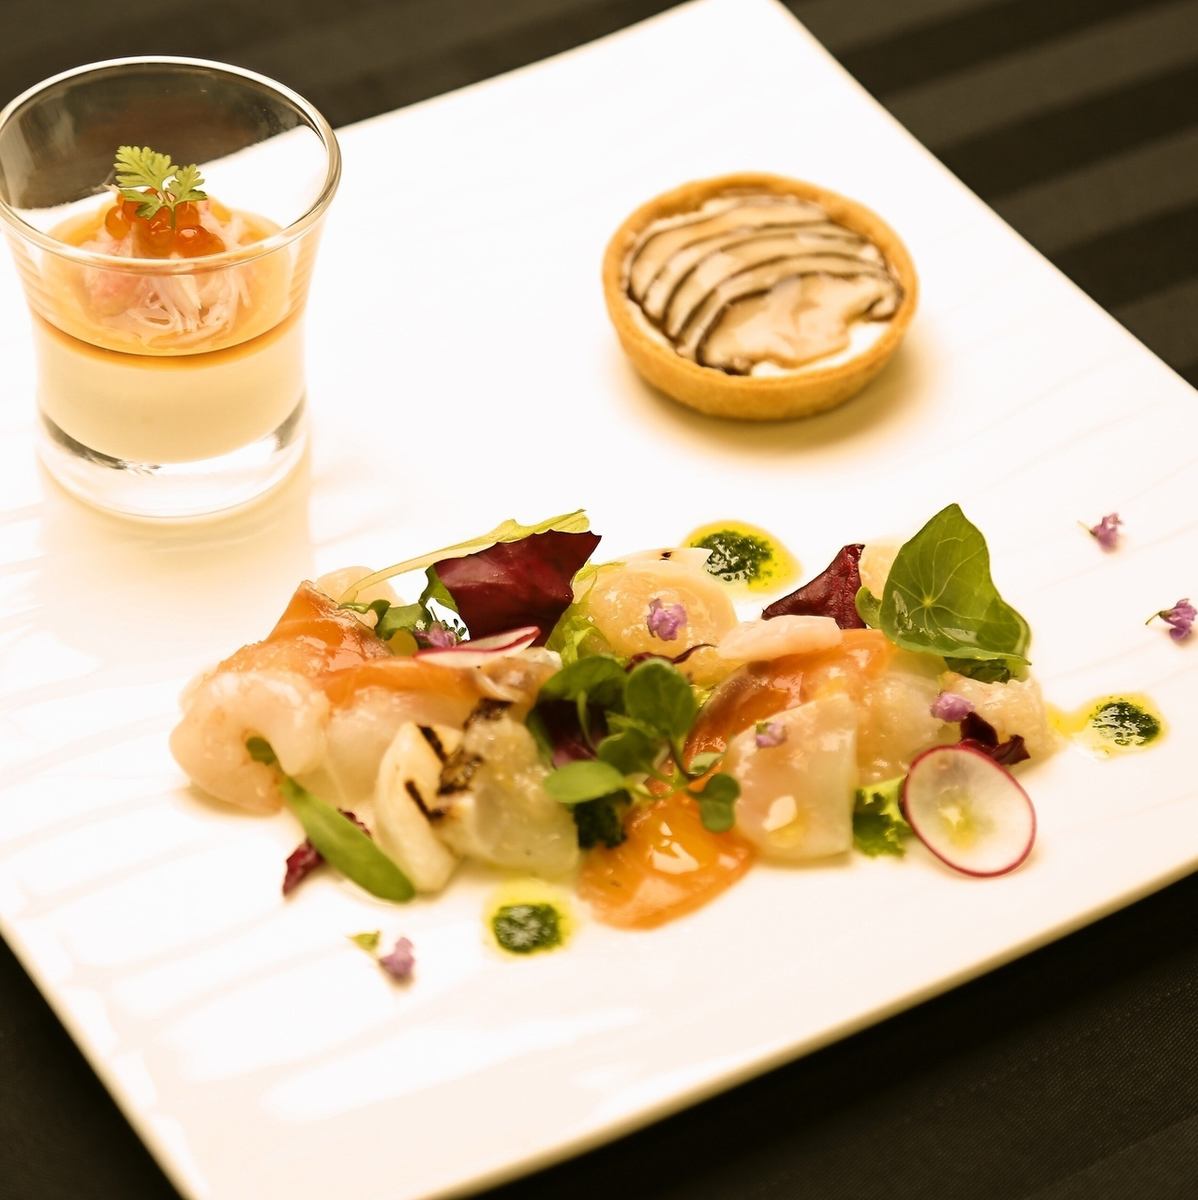 Enjoy the chef's signature French cuisine.Dinner course ☆ 6 dishes from 5,000 yen